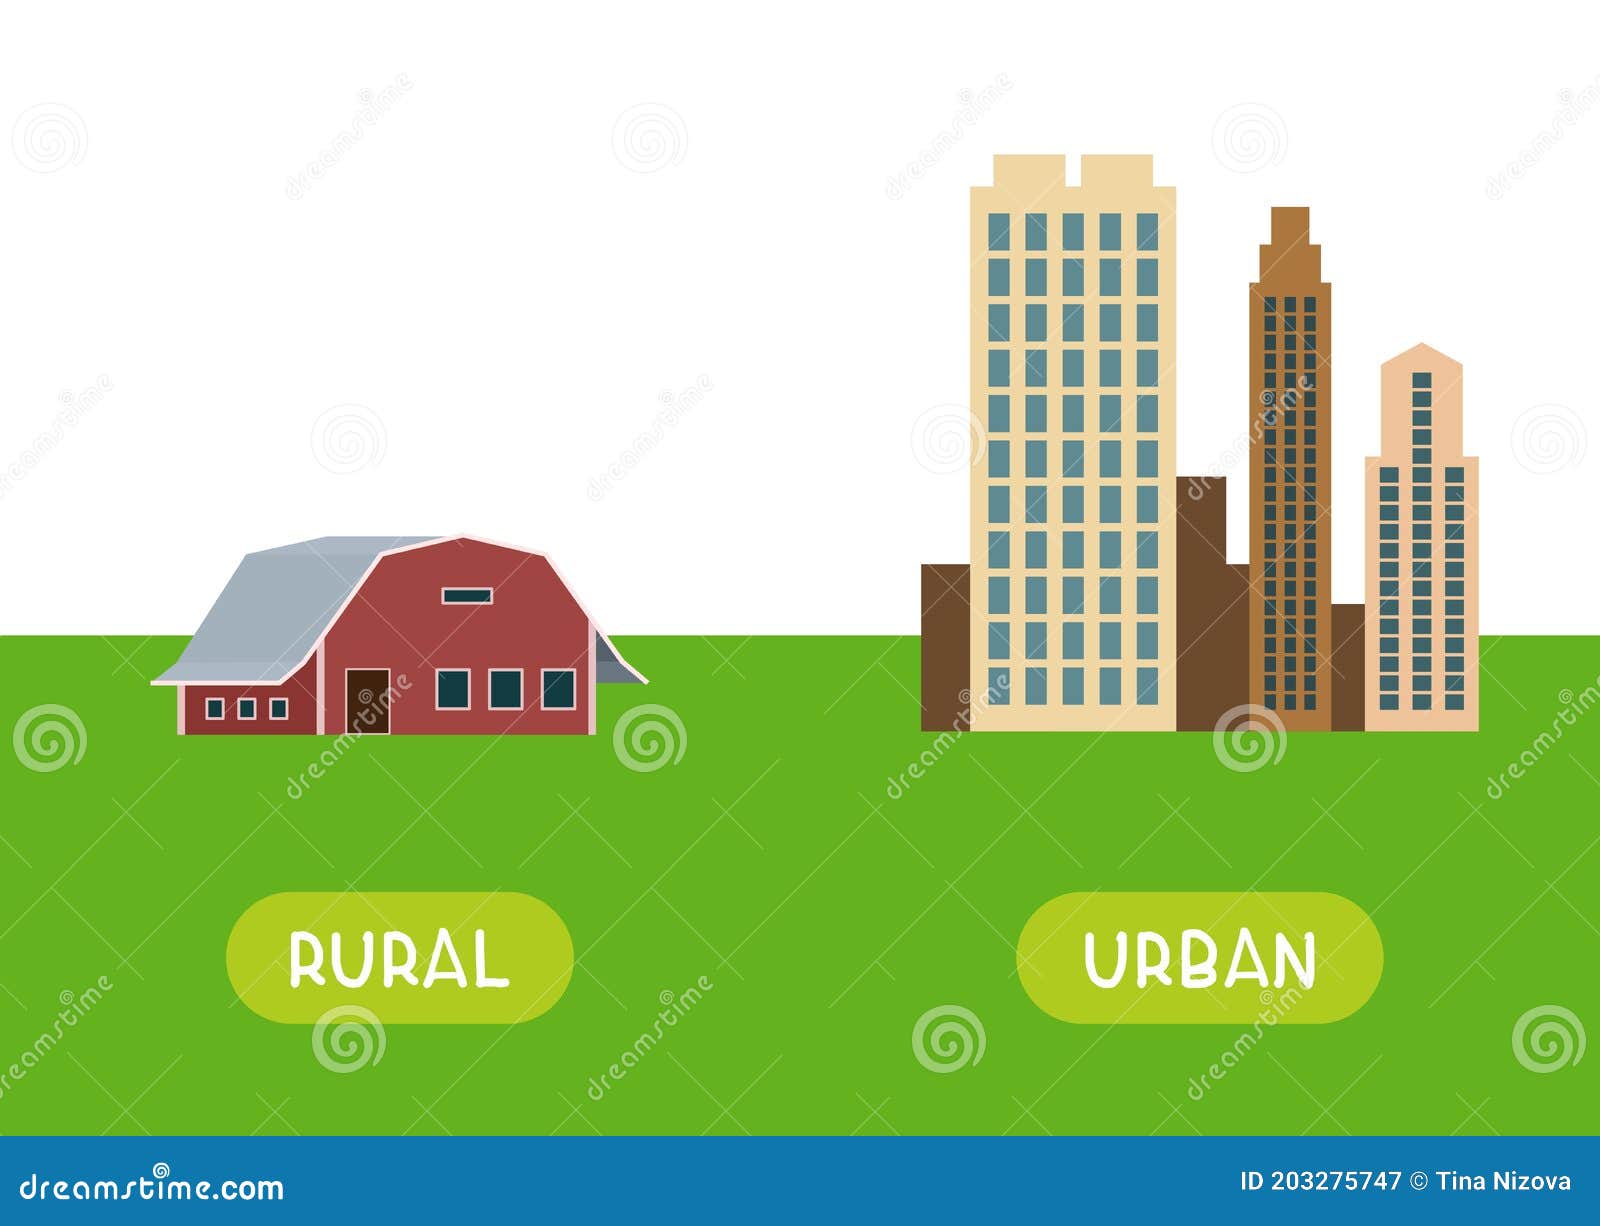 rural and urban antonyms word card  template. flashcard fo